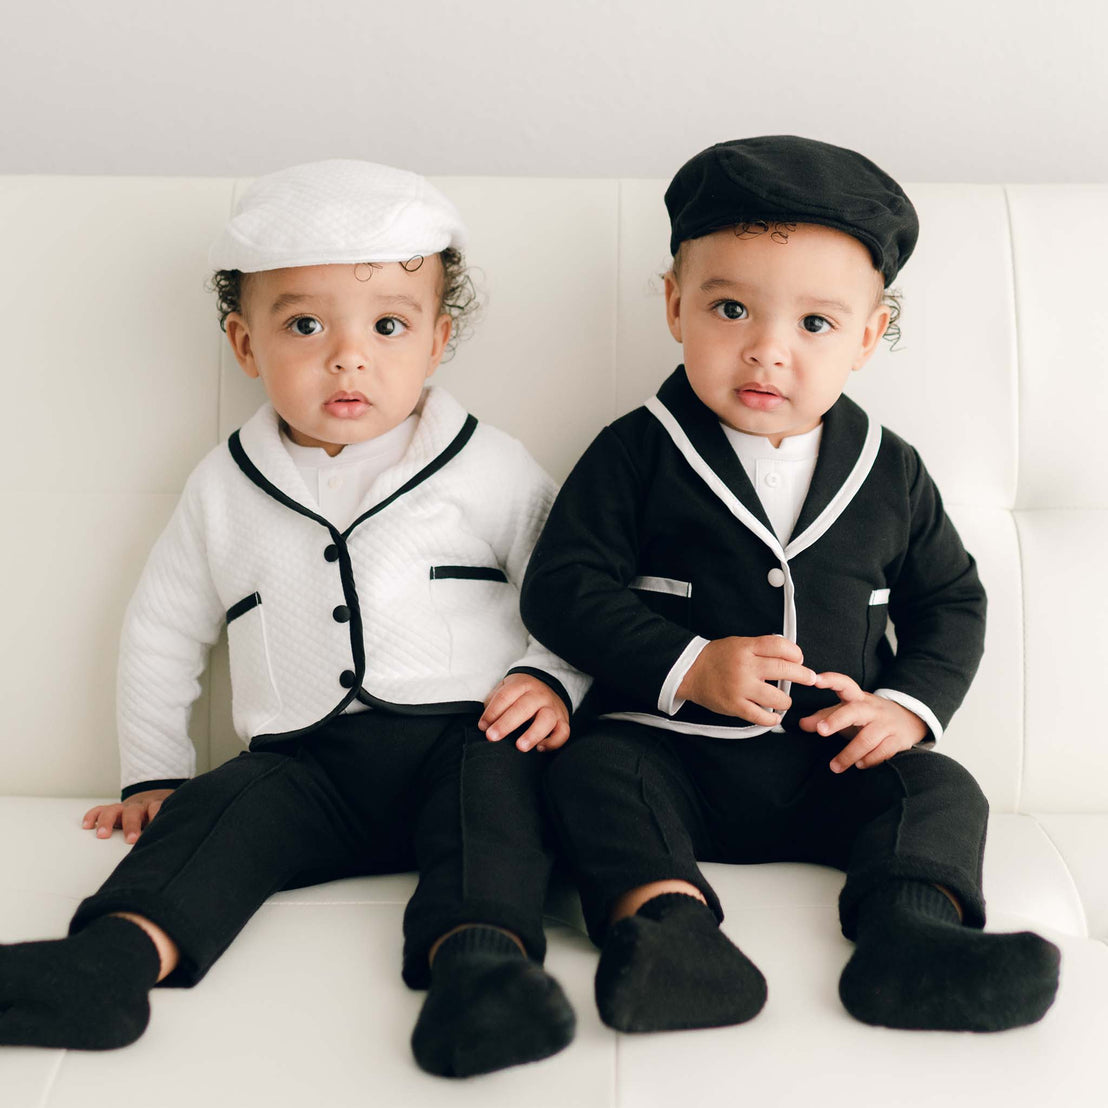 Two twin boys sitting on a couch and wearing the James 3-Piece Suits. One boy is wearing the white jacket and the other is wearing a black jacket.. The 3-Piece Suit includes the jacket, pants and onesie.